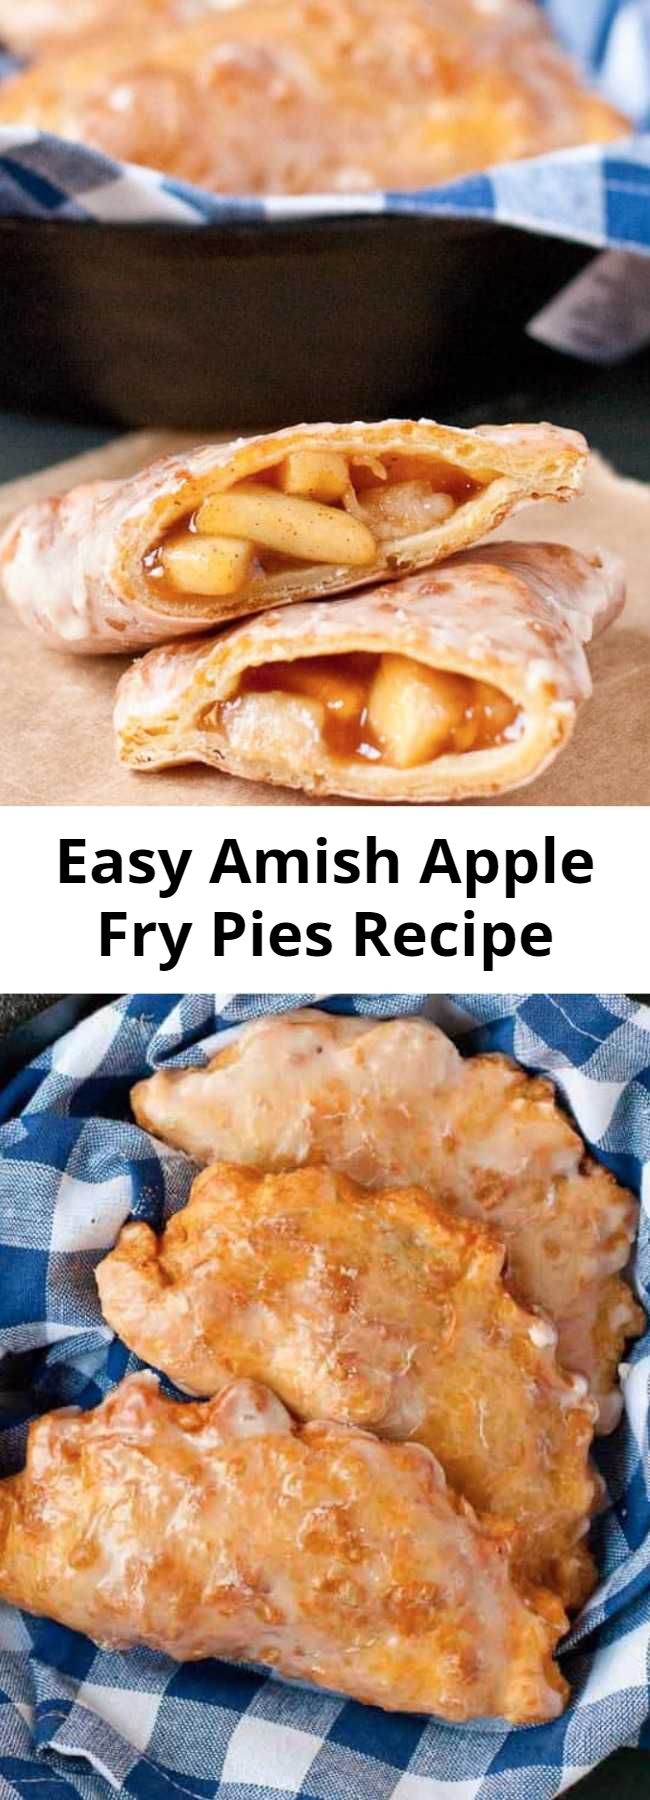 Easy Amish Apple Fry Pies Recipe - These Amish Apple Fry Pies are irresistible. The filling is simple with just a hint of spice. The crust is tender and flaky and just a little crunchy. And the glaze? It dries into a crackly sweet coating that seals in all the goodness.